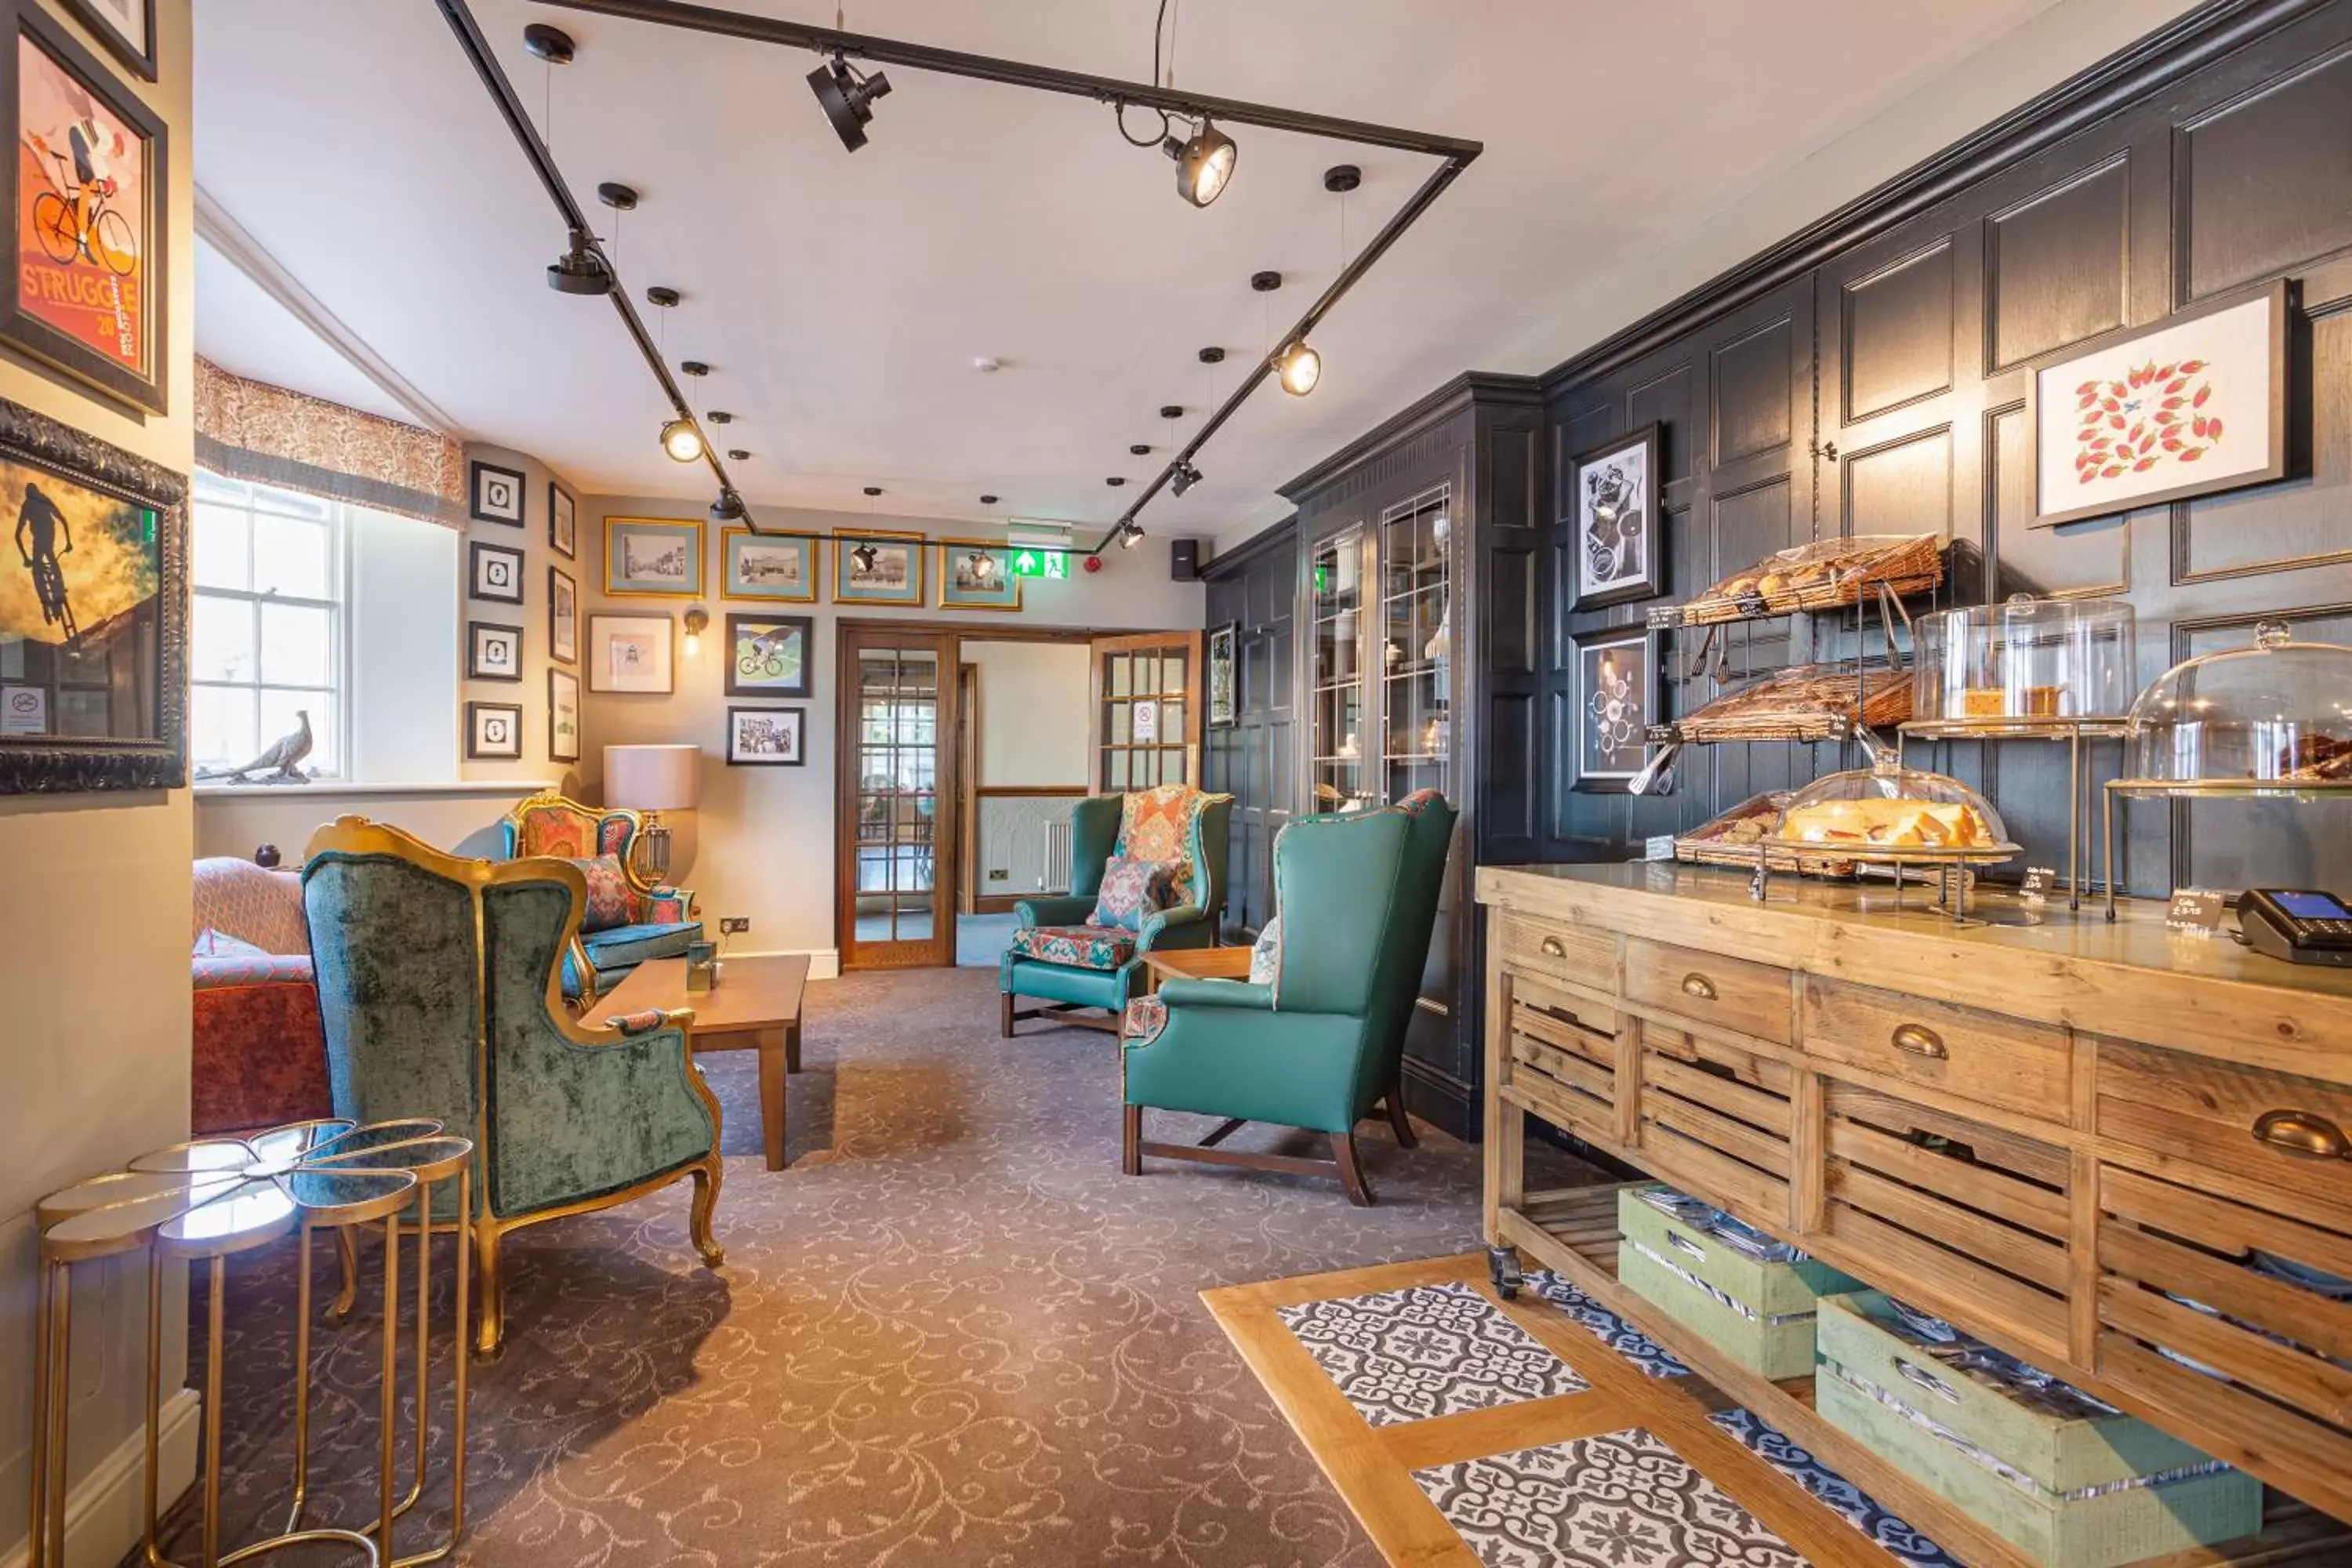 Lounge or bar in The Crown Hotel, Boroughbridge, North Yorkshire